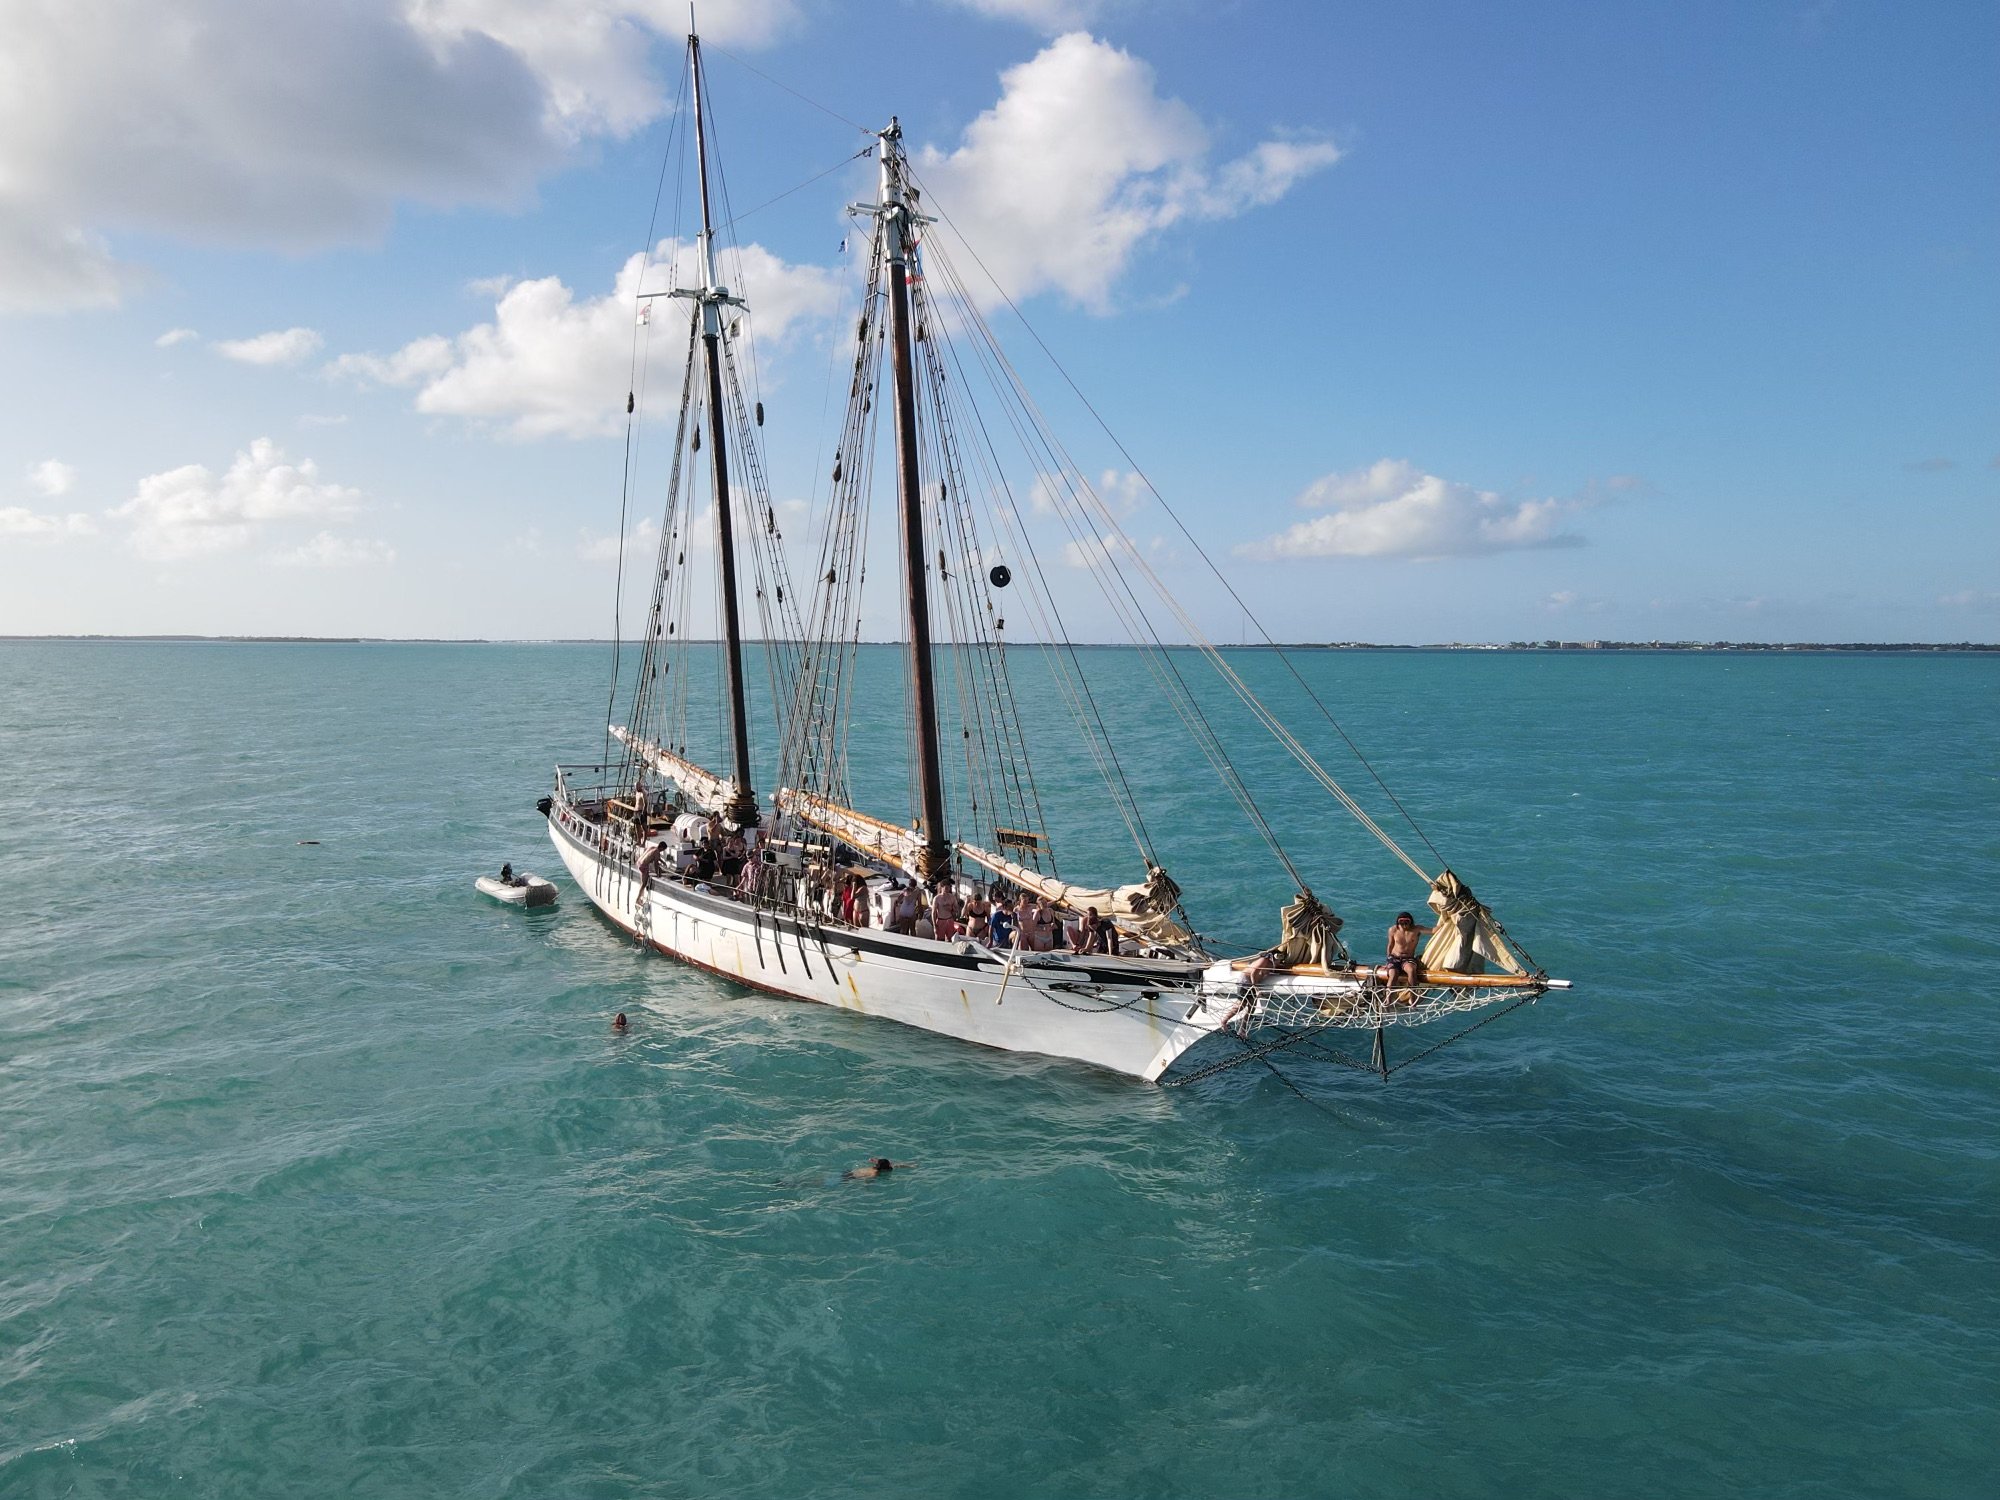 Western Union Schooner - All You Need to Know BEFORE You Go (with Photos)